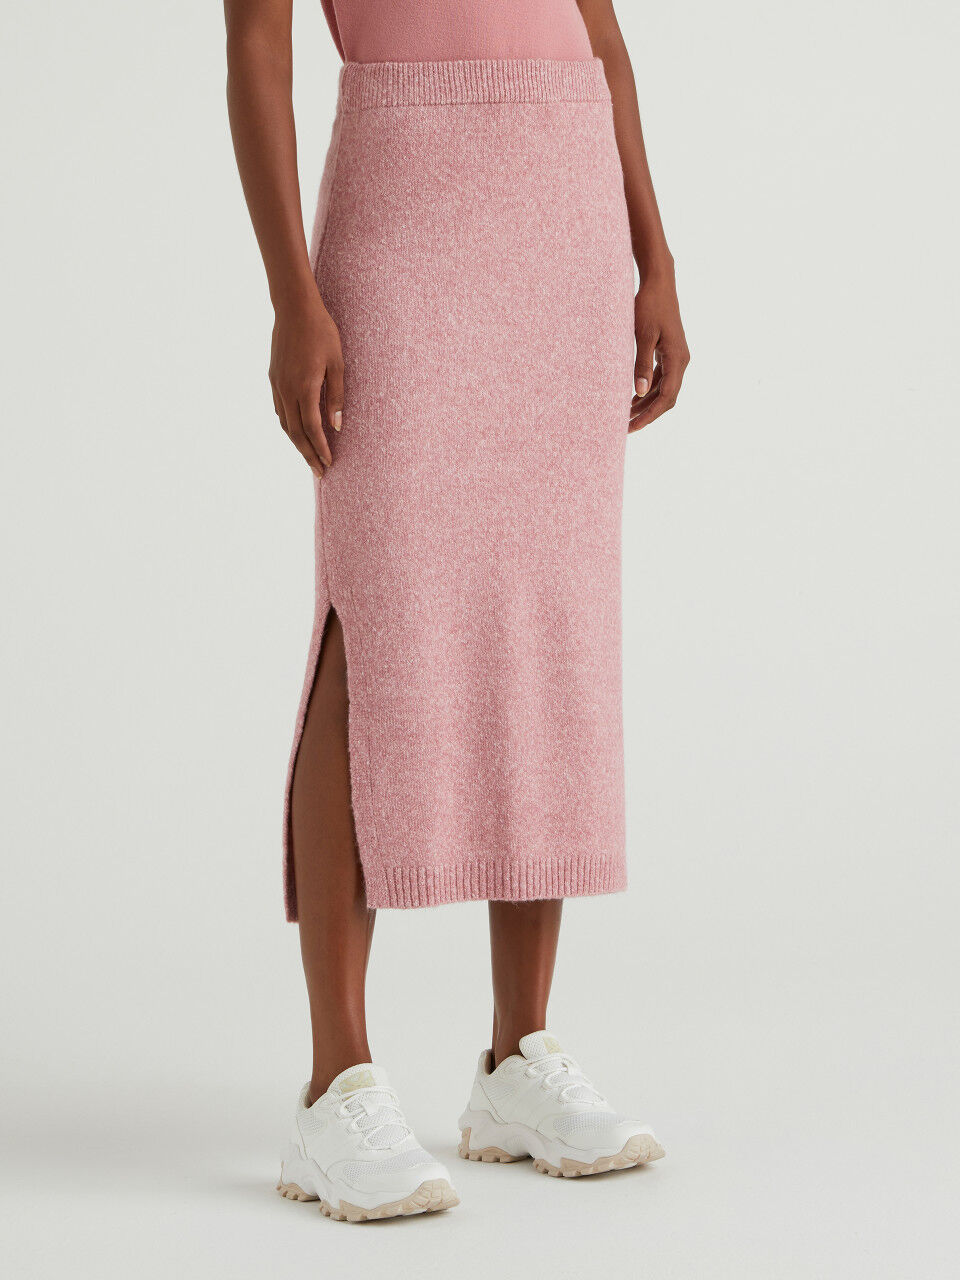 Women's Skirts New Collection 2022 | Benetton